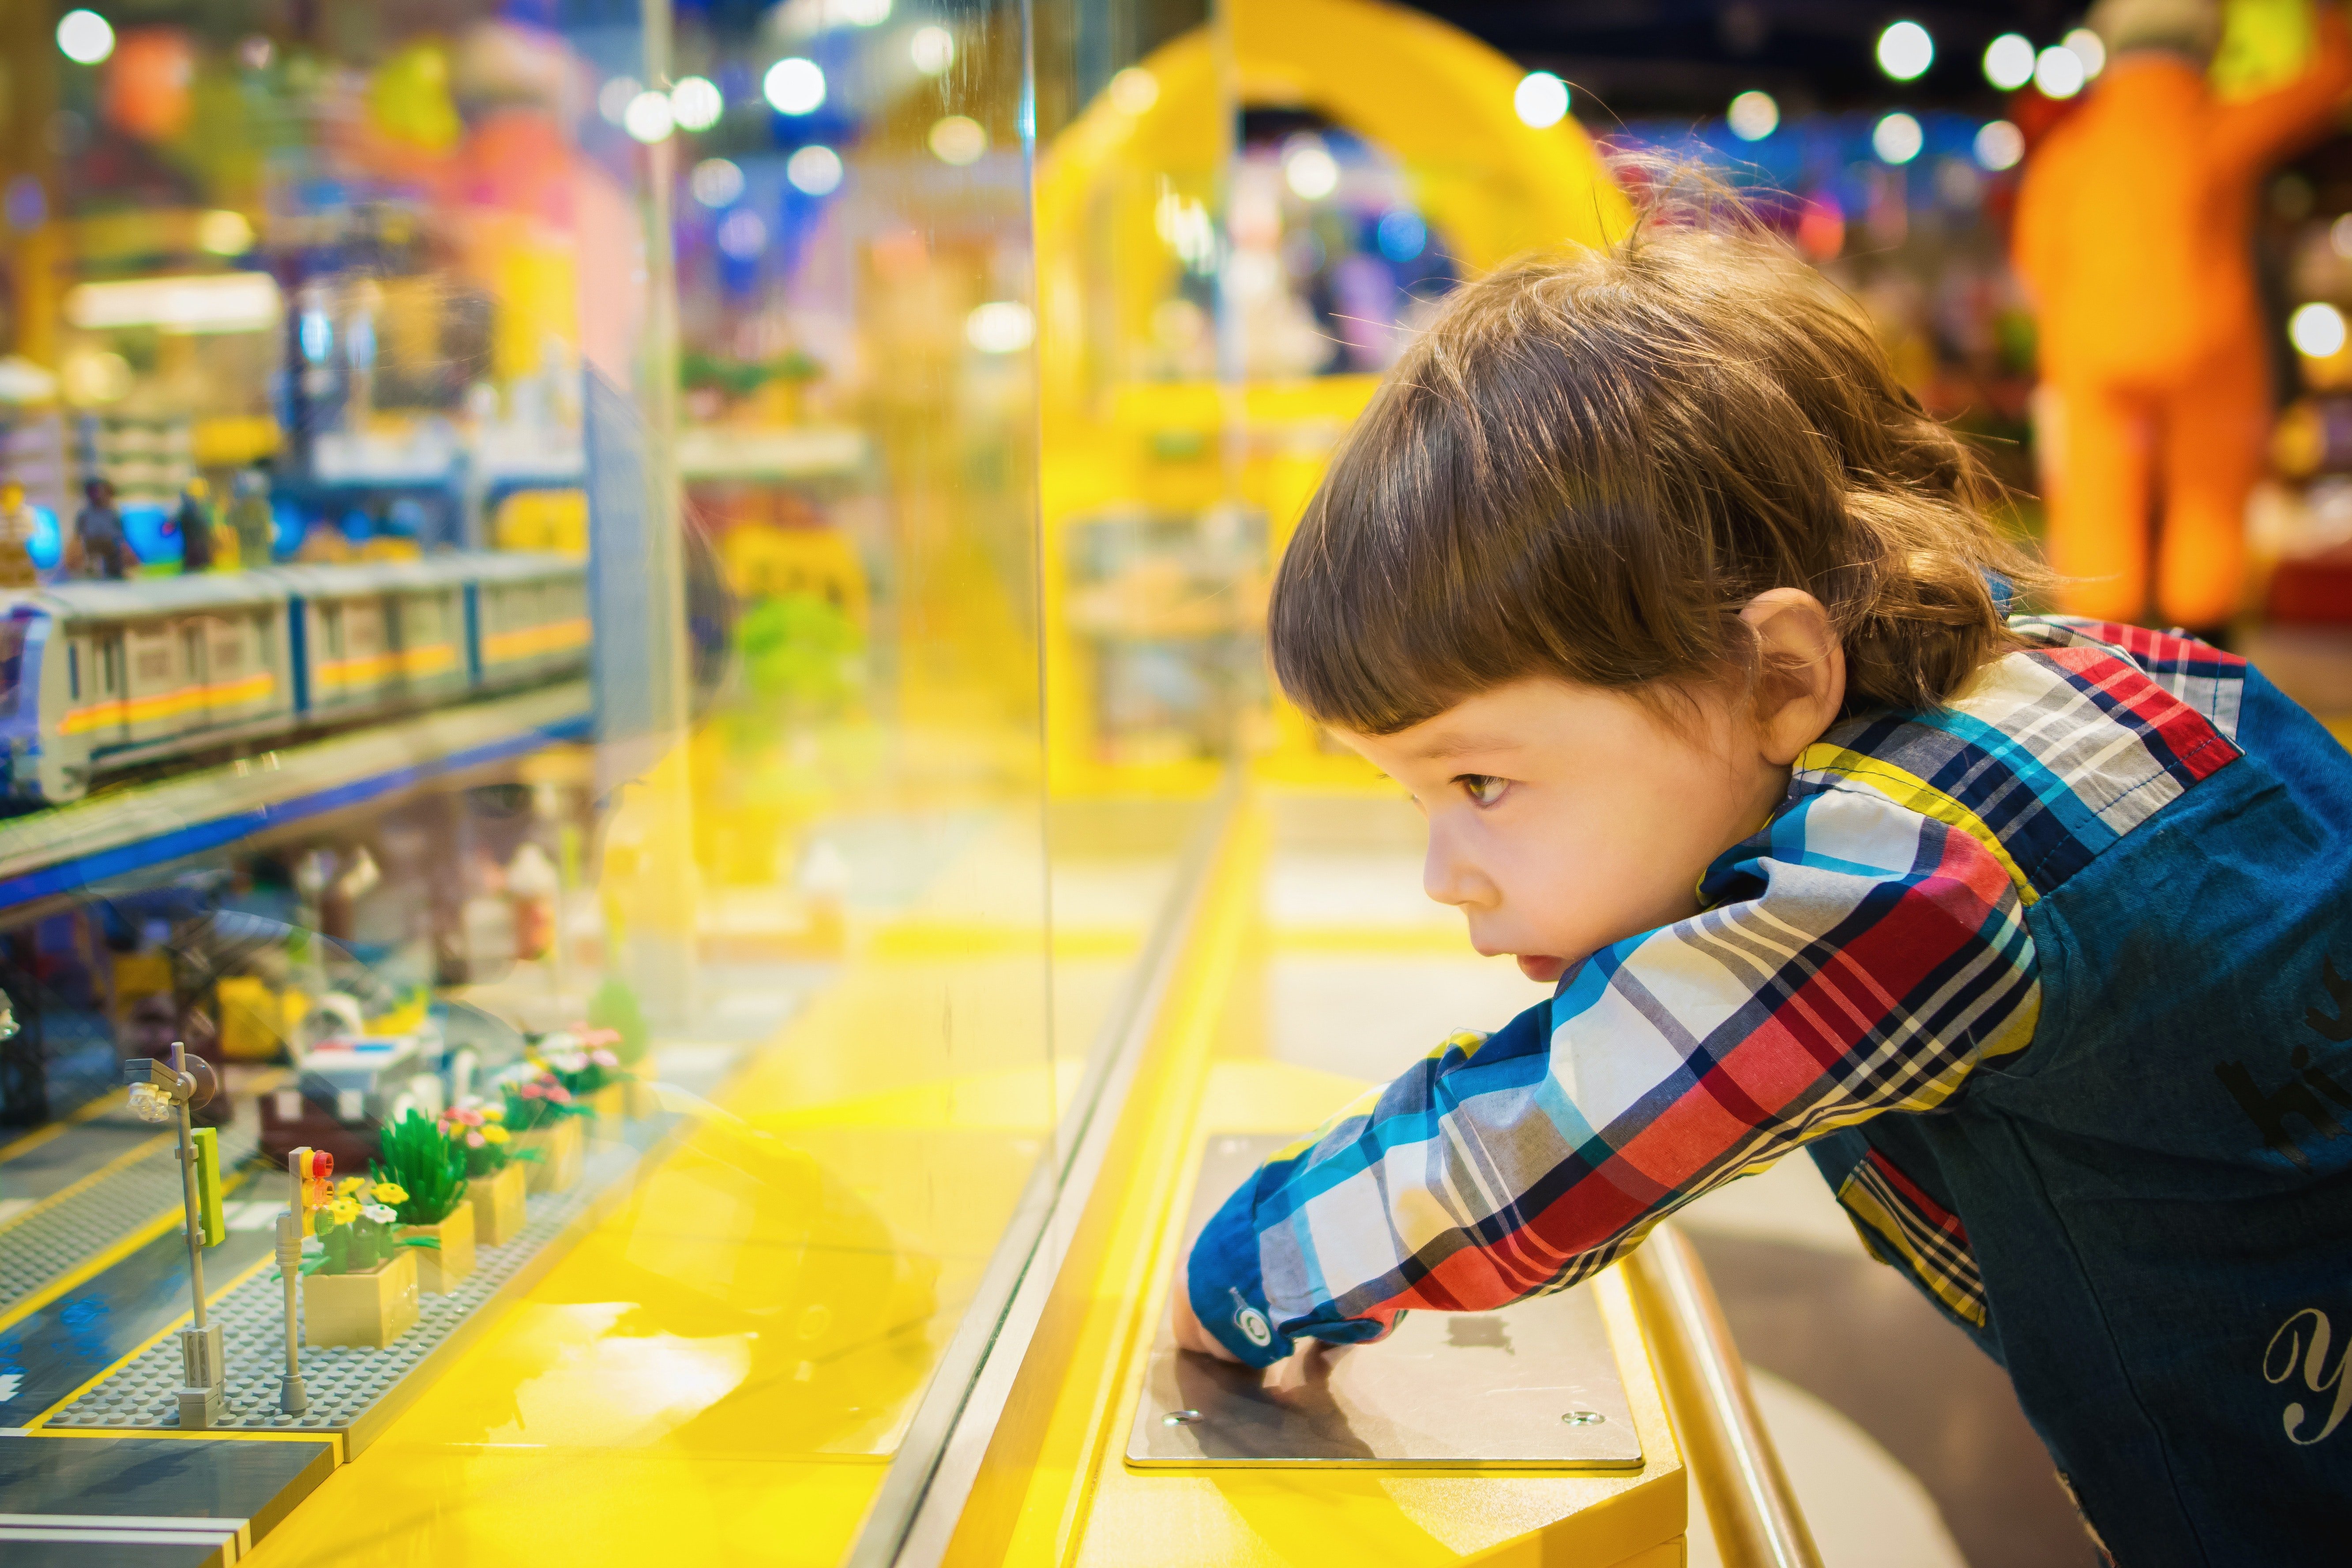 Little Ryan was running about in the store while his dad shopped in the other corner. | Source: Pexels